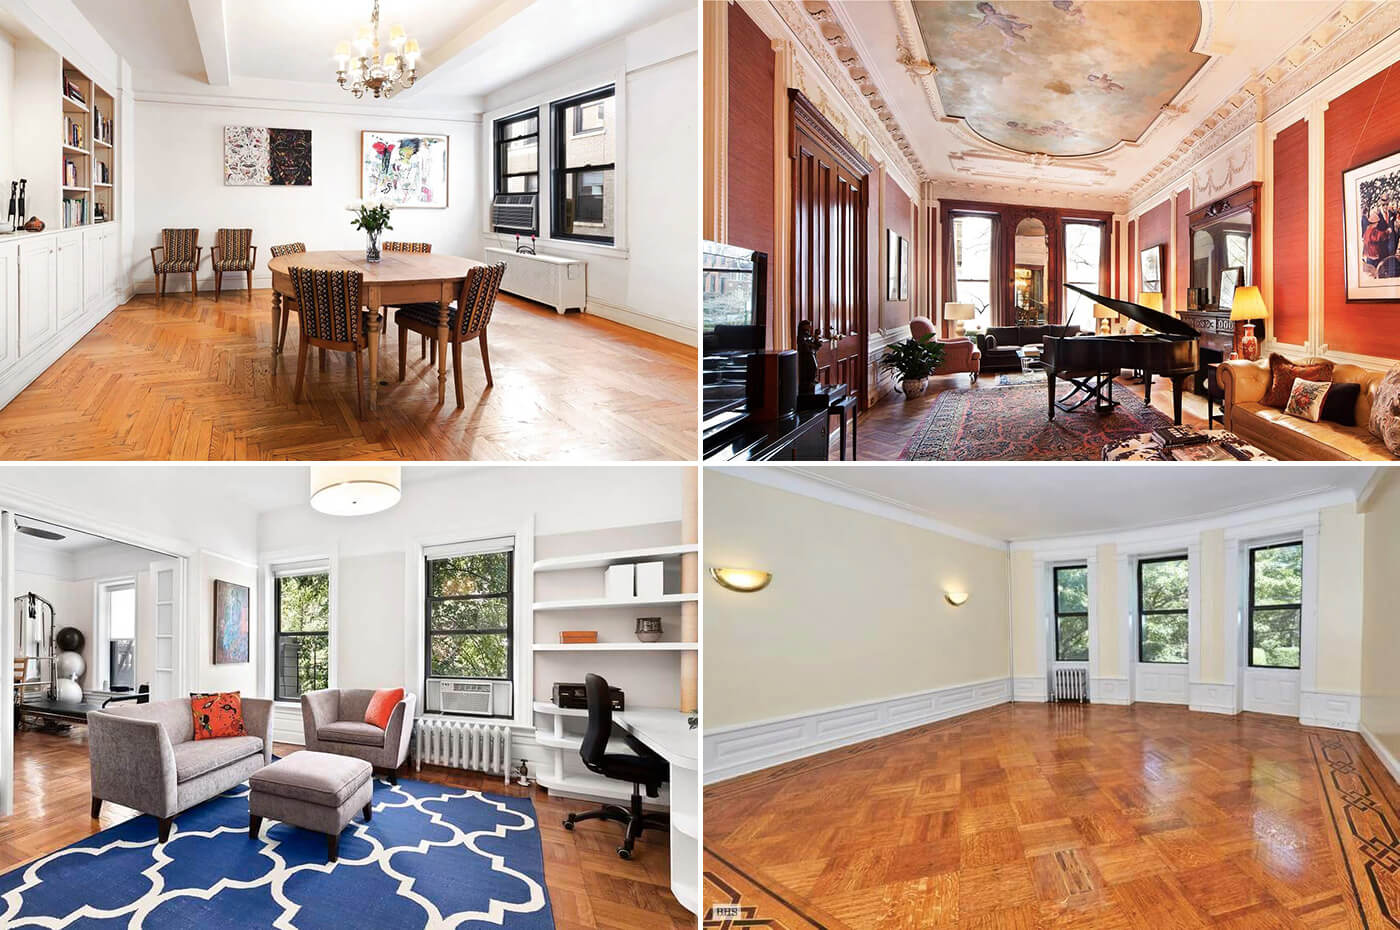 Brooklyn Homes for Sale Brooklyn Heights Park Slope Prospect Heights